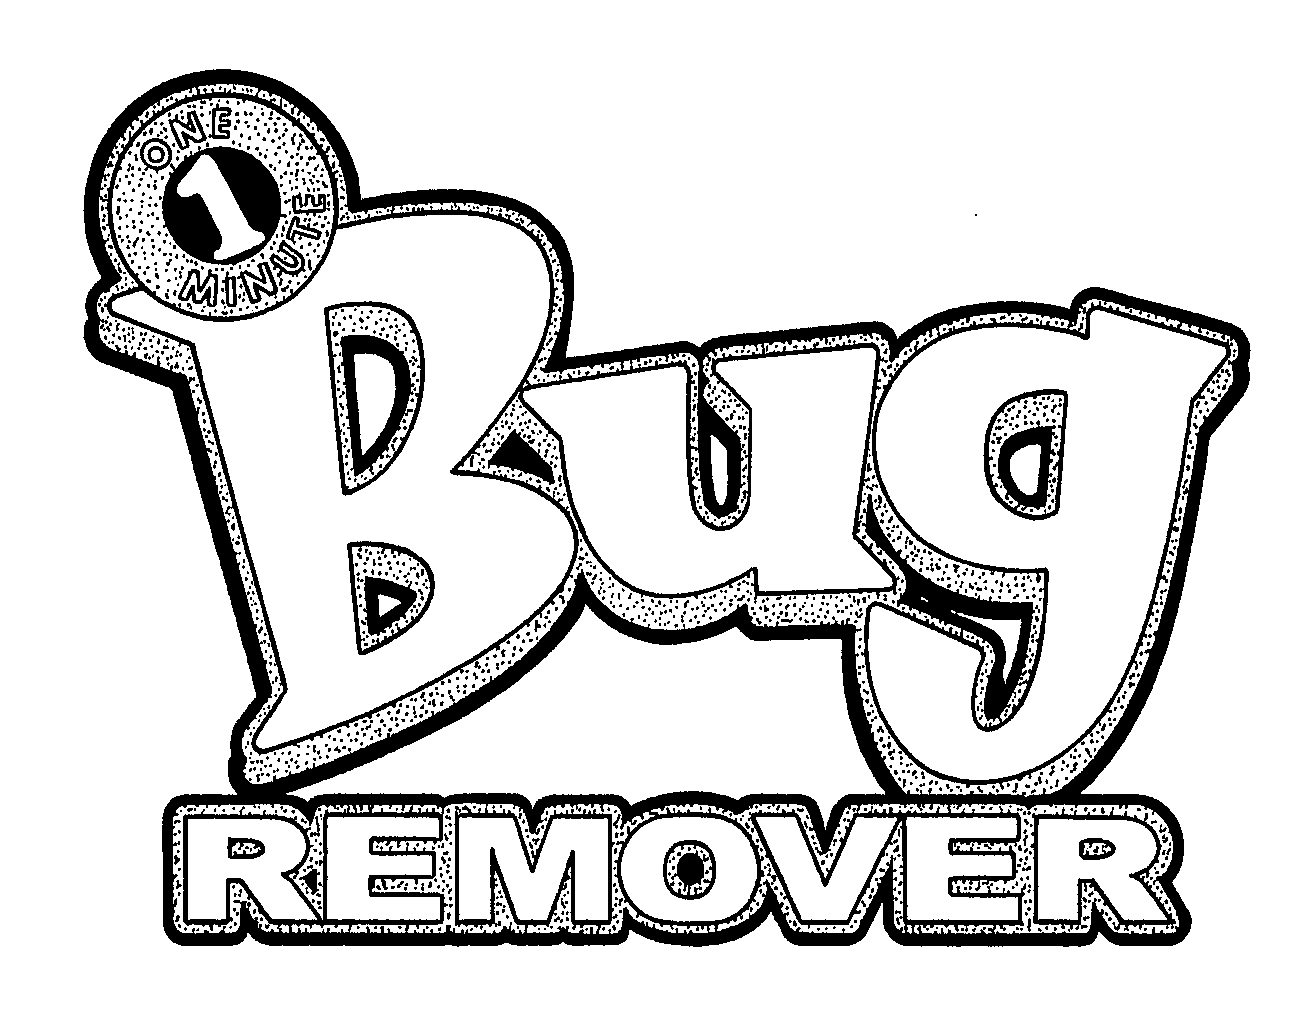  1 ONE MINUTE BUG REMOVER